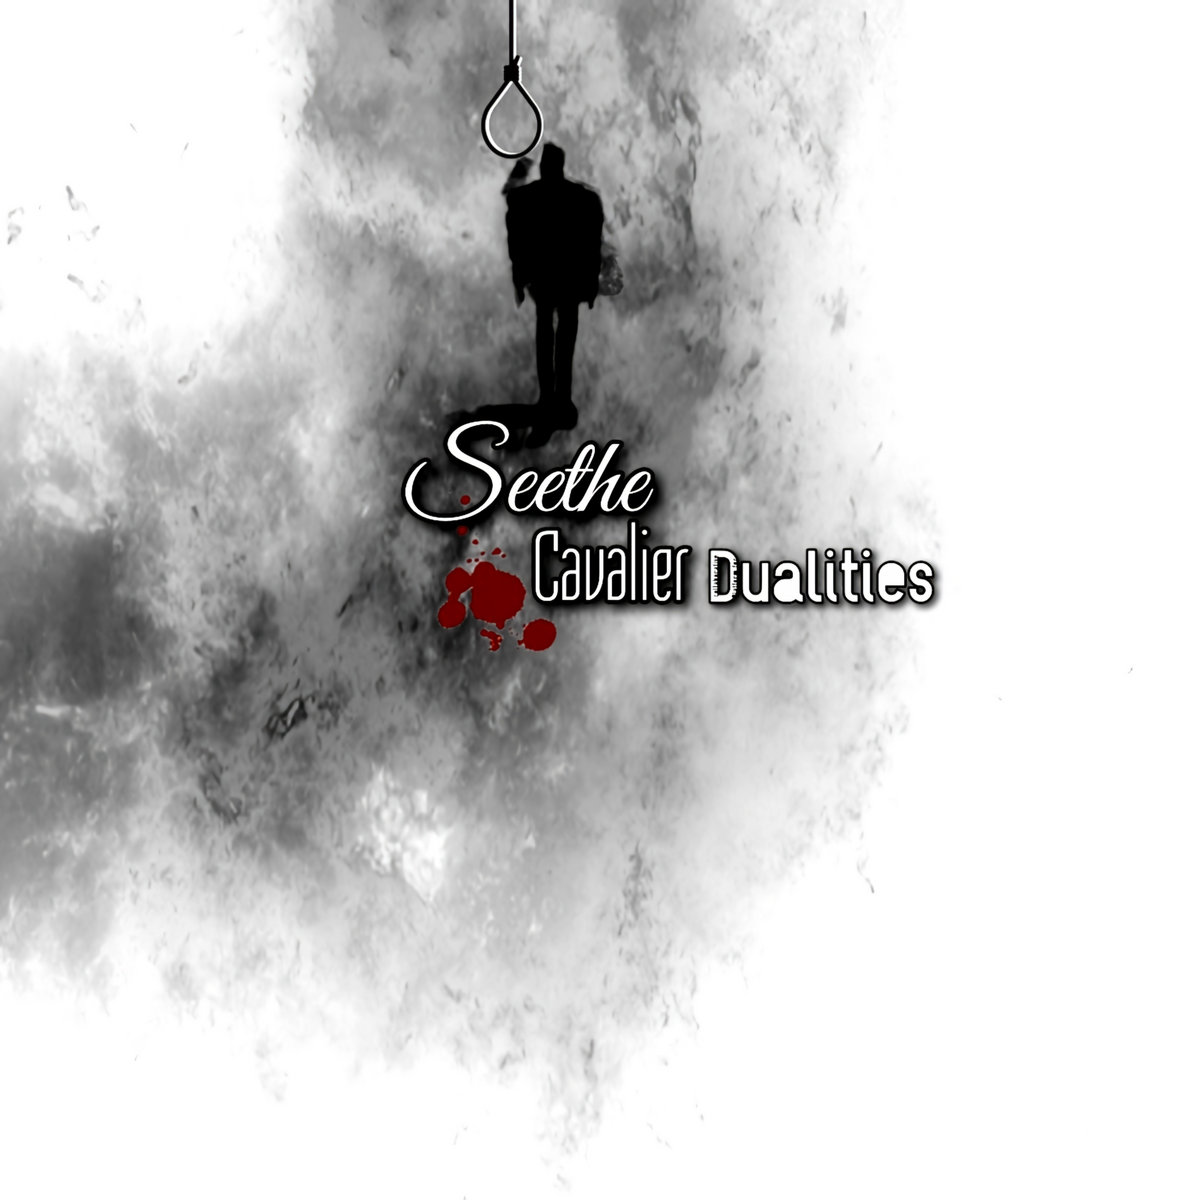 EP REVIEW: Cavalier Dualities by Seethe